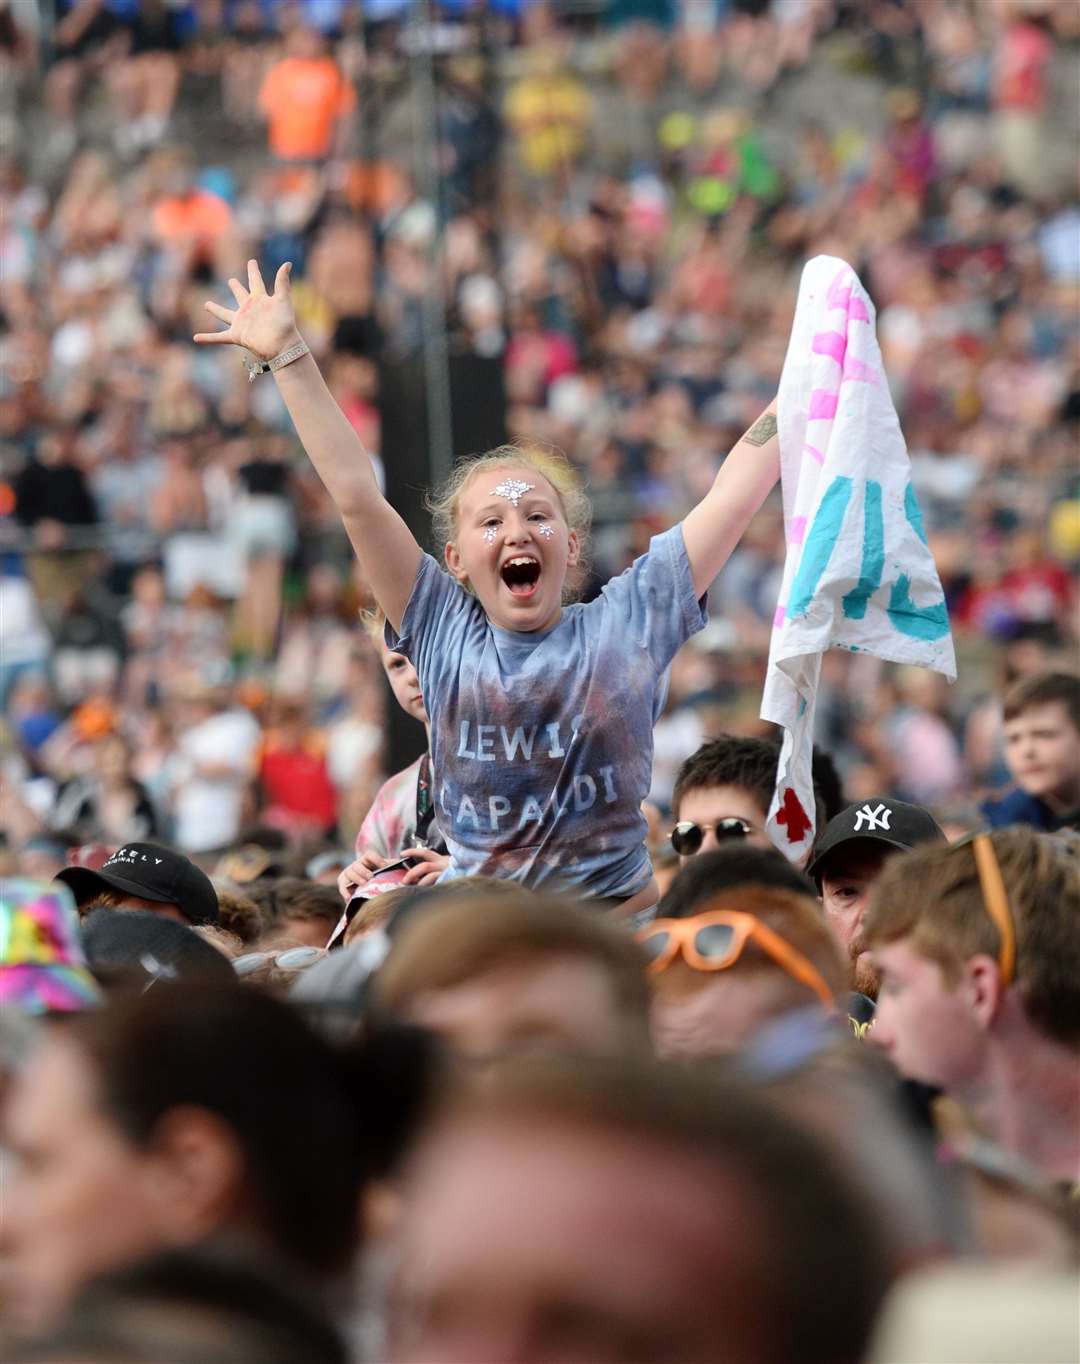 Belladrum 2019. Young Lewis Capaldi fan. Picture: Gary Anthony. Image No.044555.